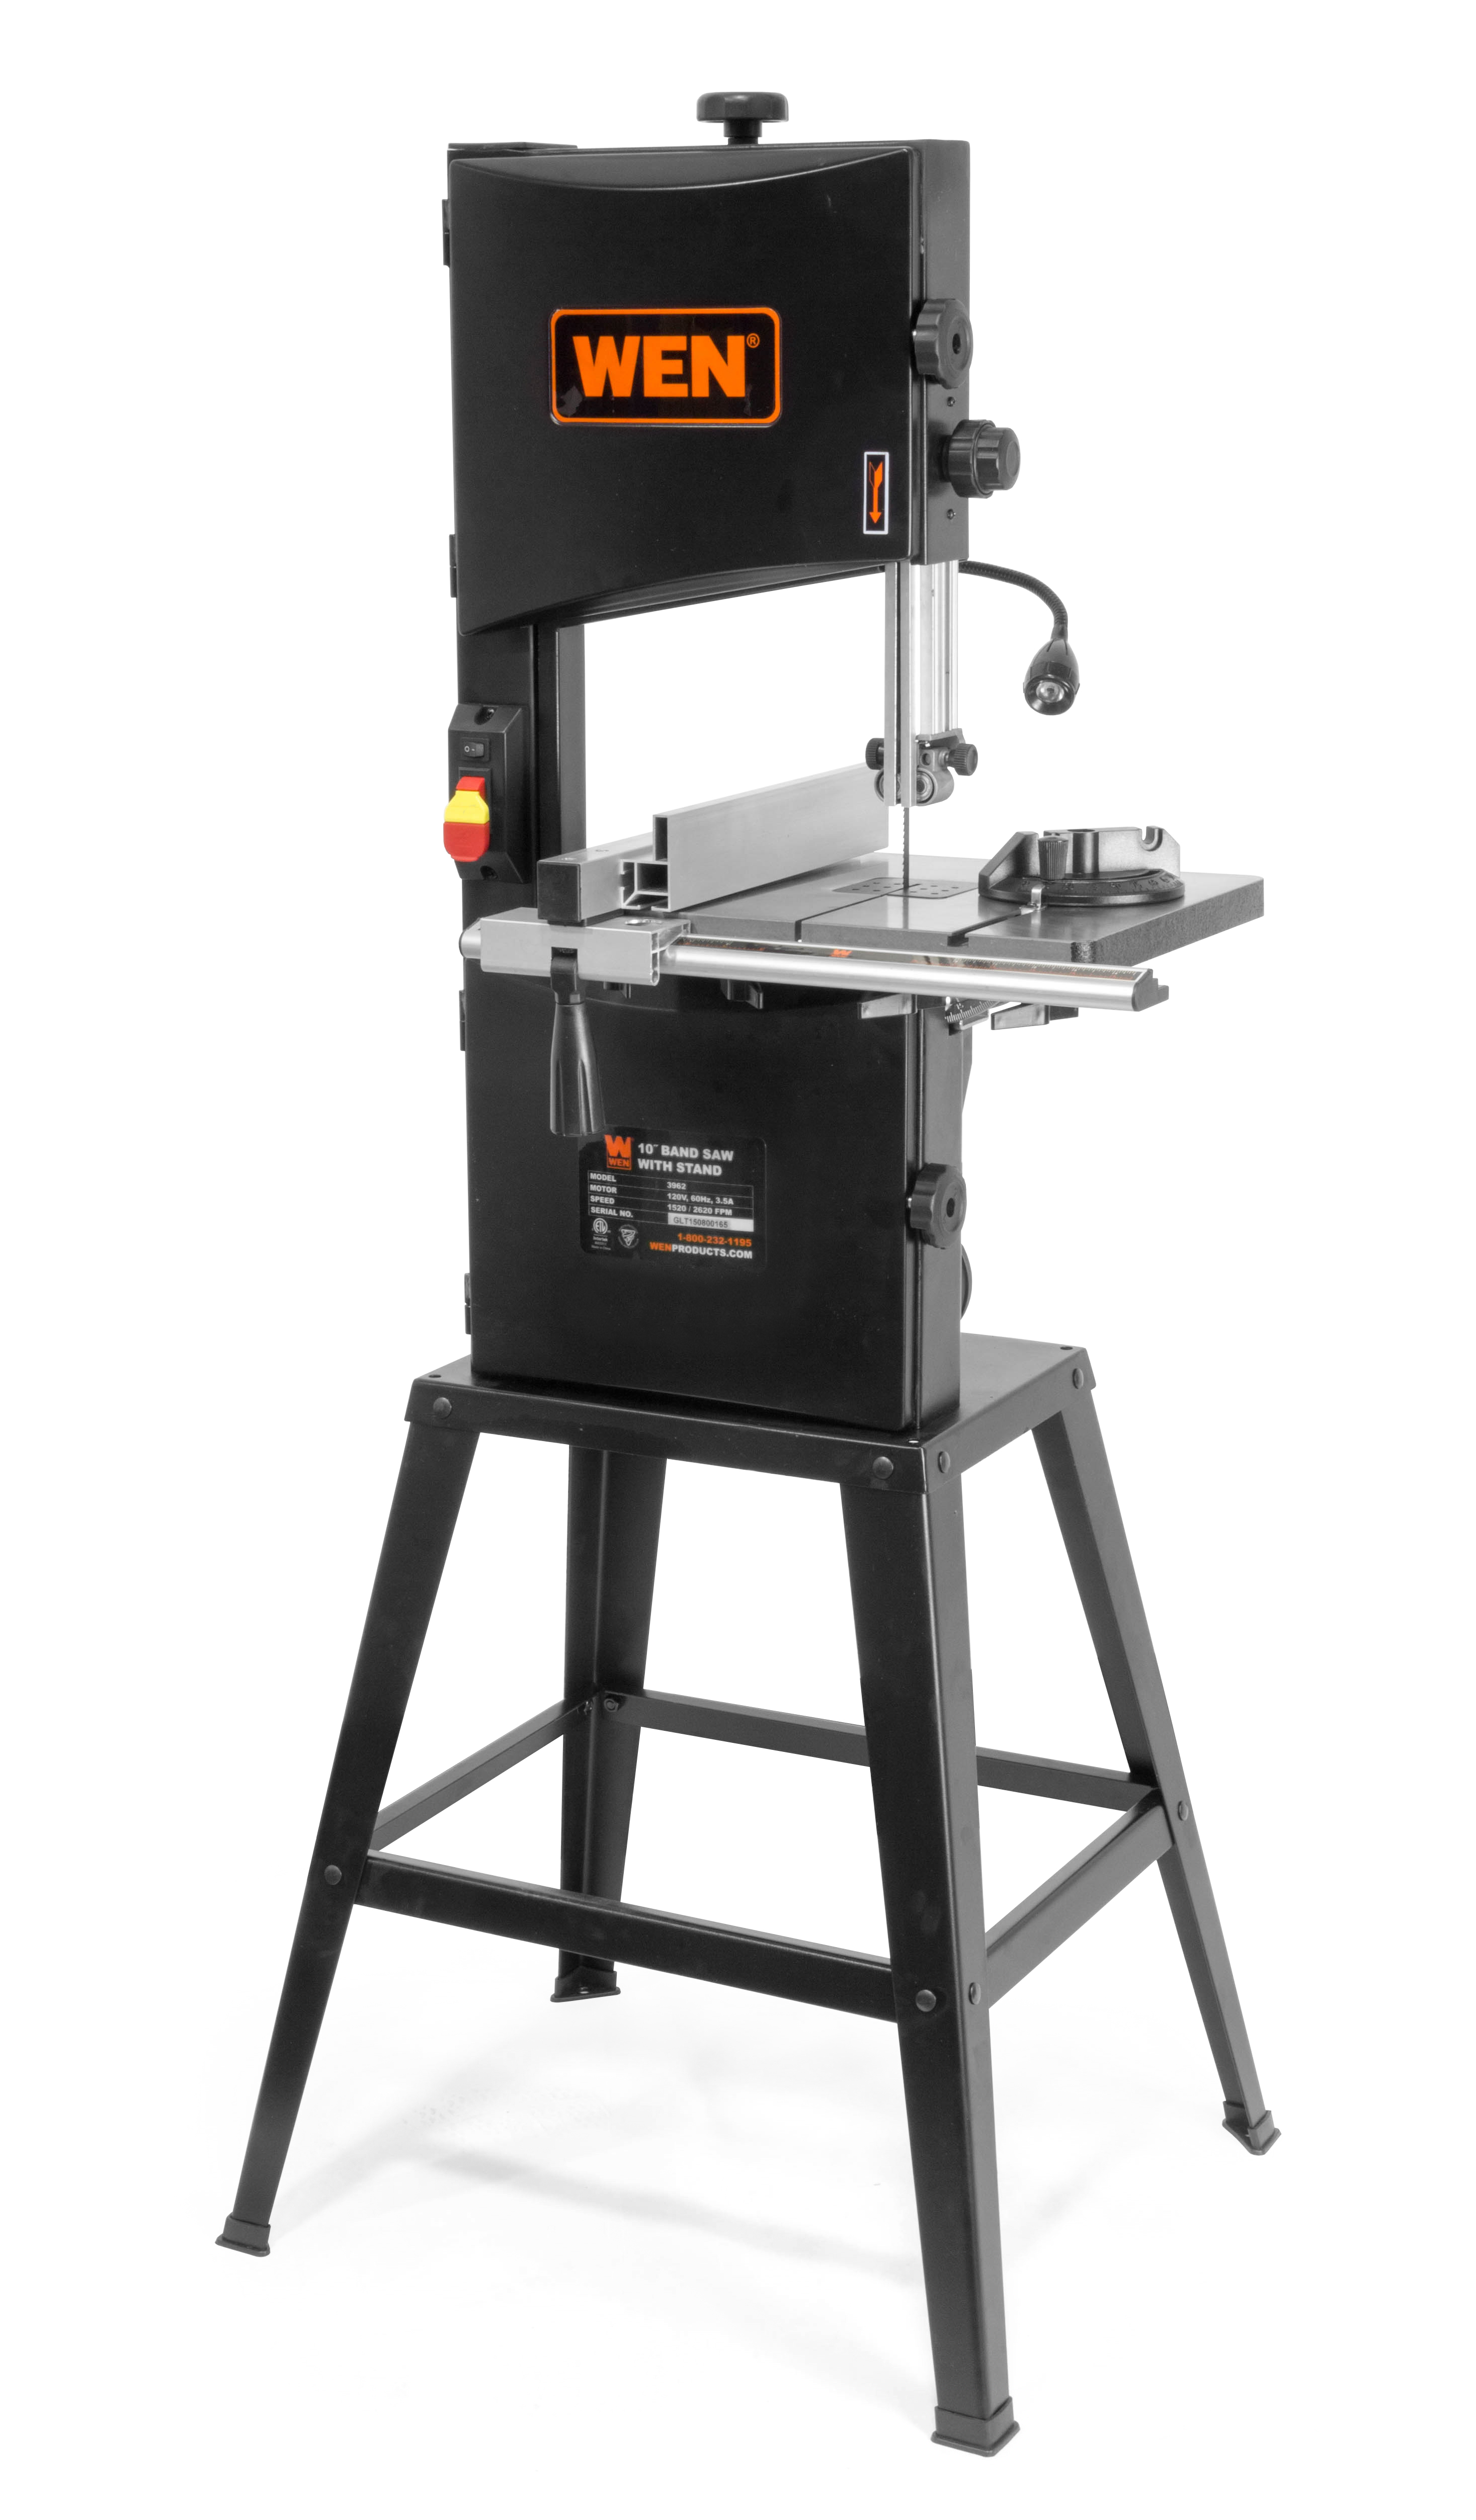 WEN 3.5-Amp 10-Inch Two-Speed Band Saw with Stand and Worklight, 3962 - image 1 of 7